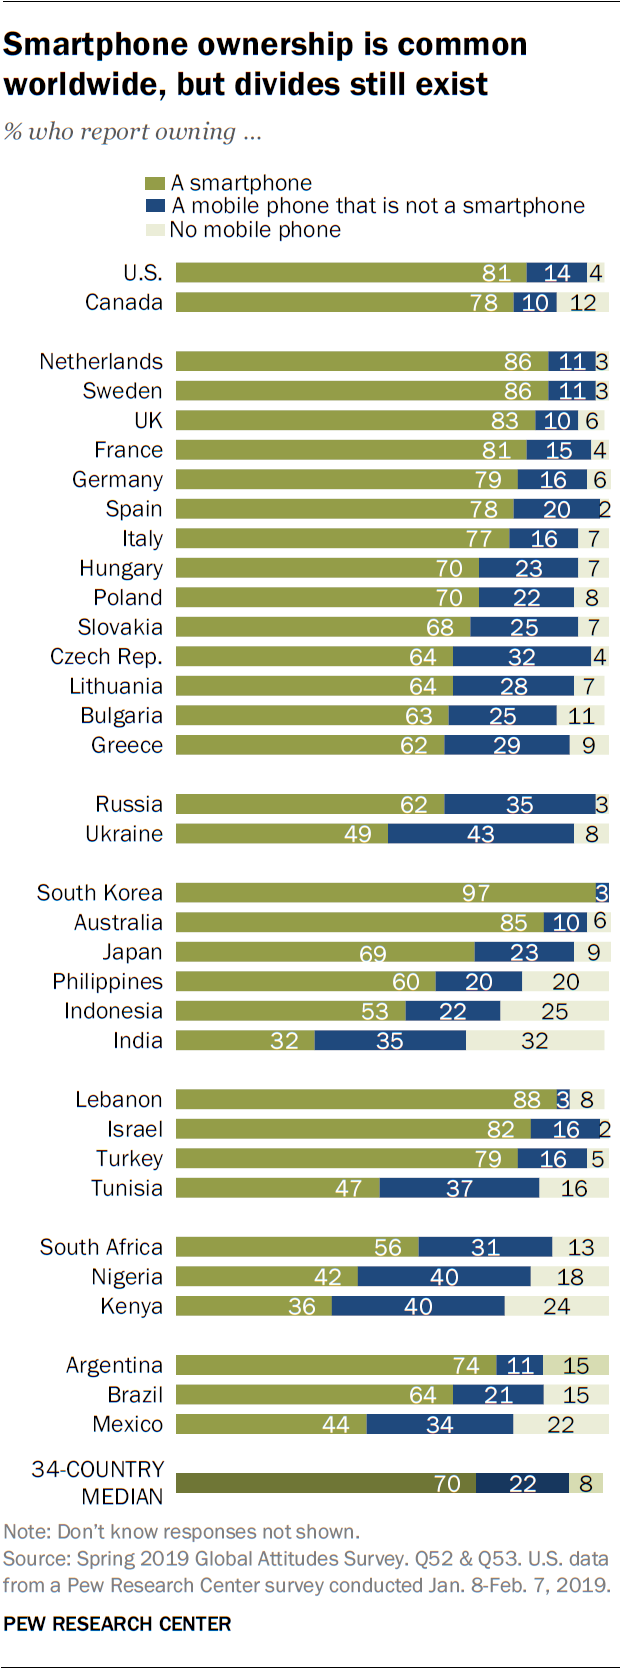 Smartphone ownership is common worldwide, but divides still exist